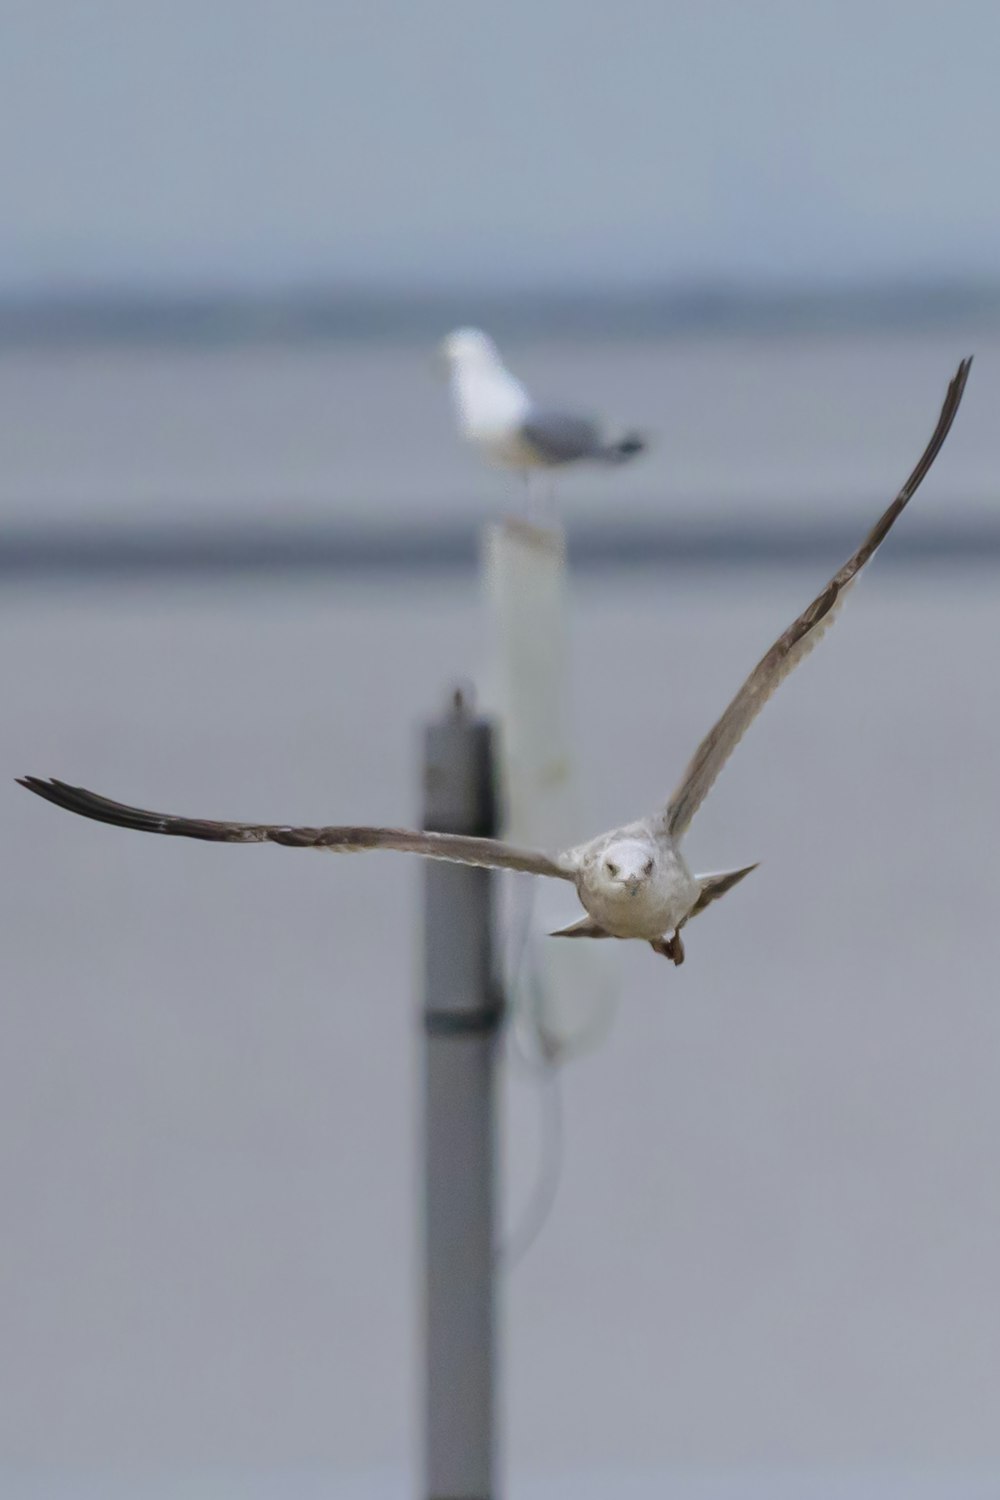 two seagulls are flying over a metal pole